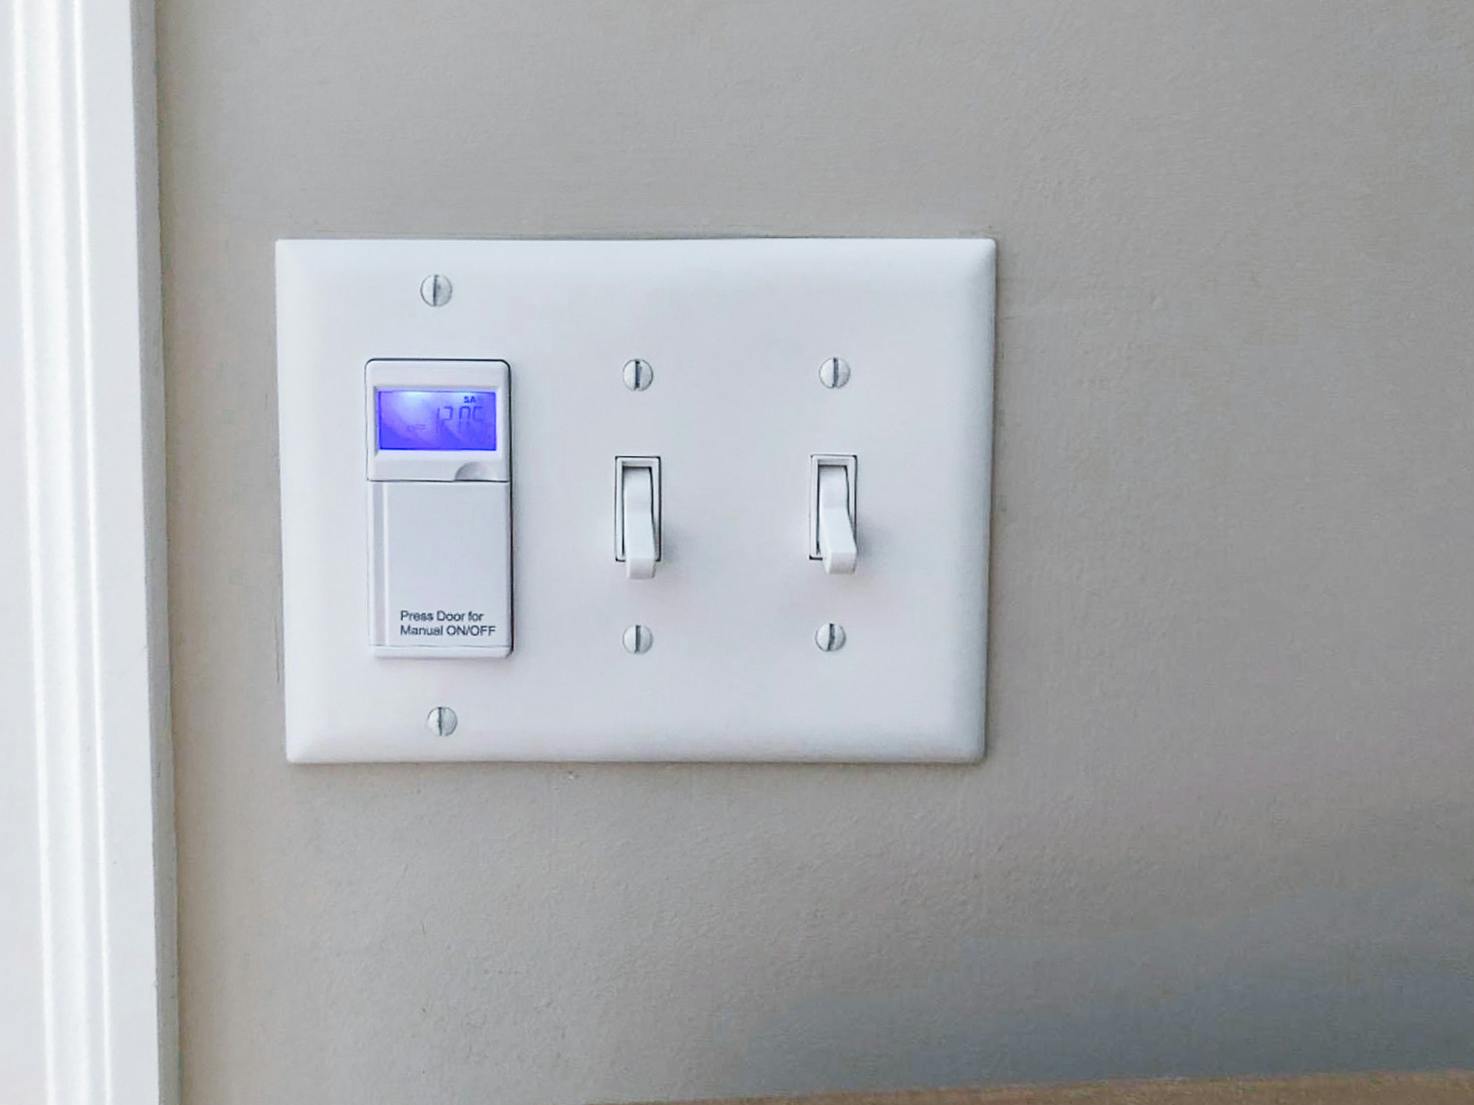 A programmable light switch timer installed next to two normal light switches on a wall.